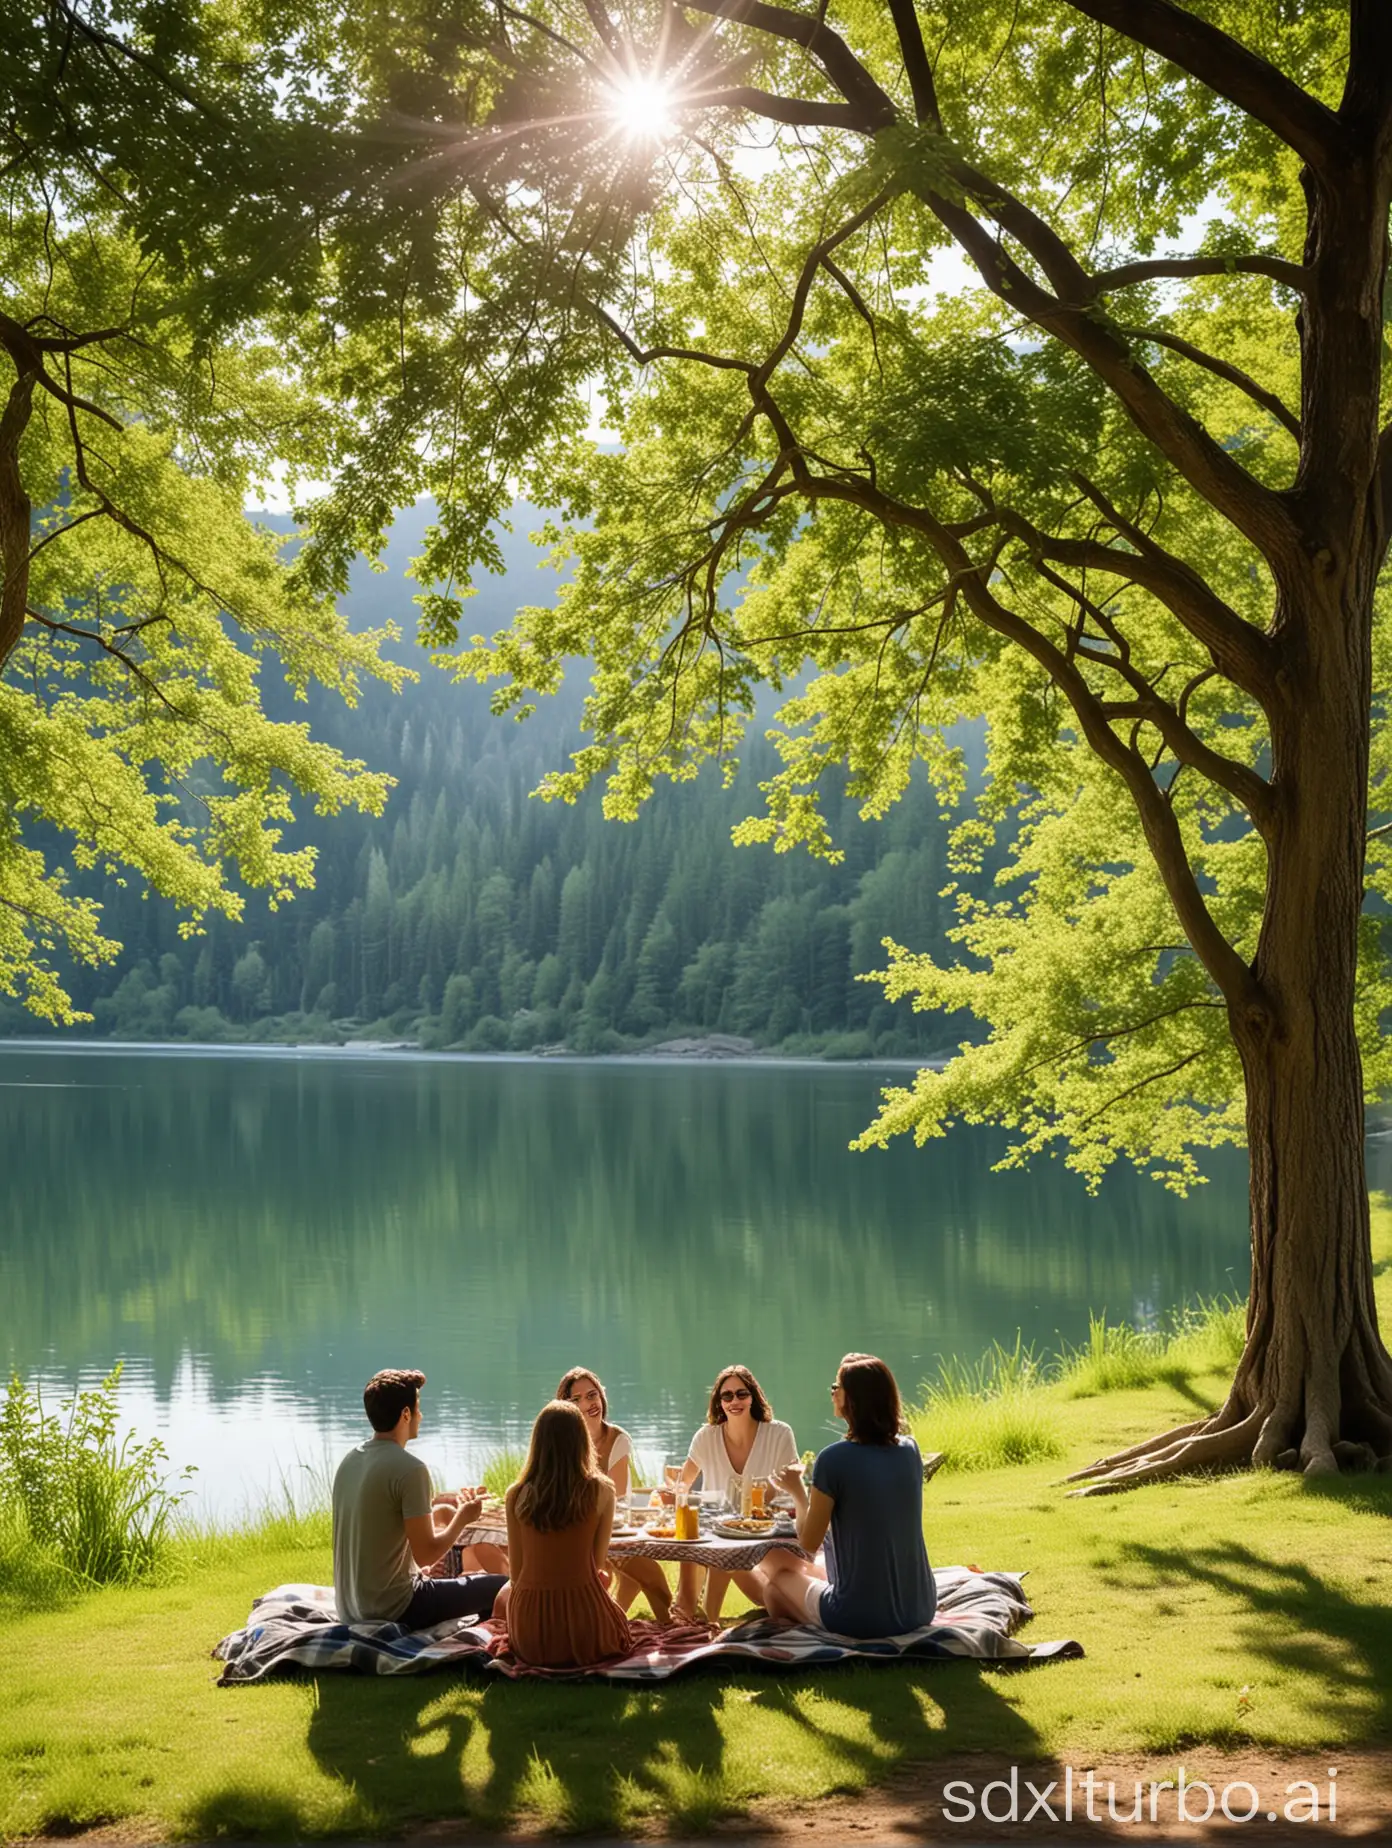 In a lush and tranquil landscape, a group of friends enjoys a picnic by a serene lake. Under the shade of leafy trees, smiles and laughter fill the air as they share moments of joy and camaraderie. The calm waters of the lake reflect the blue sky and distant mountains, creating an idyllic scene of harmony with nature.